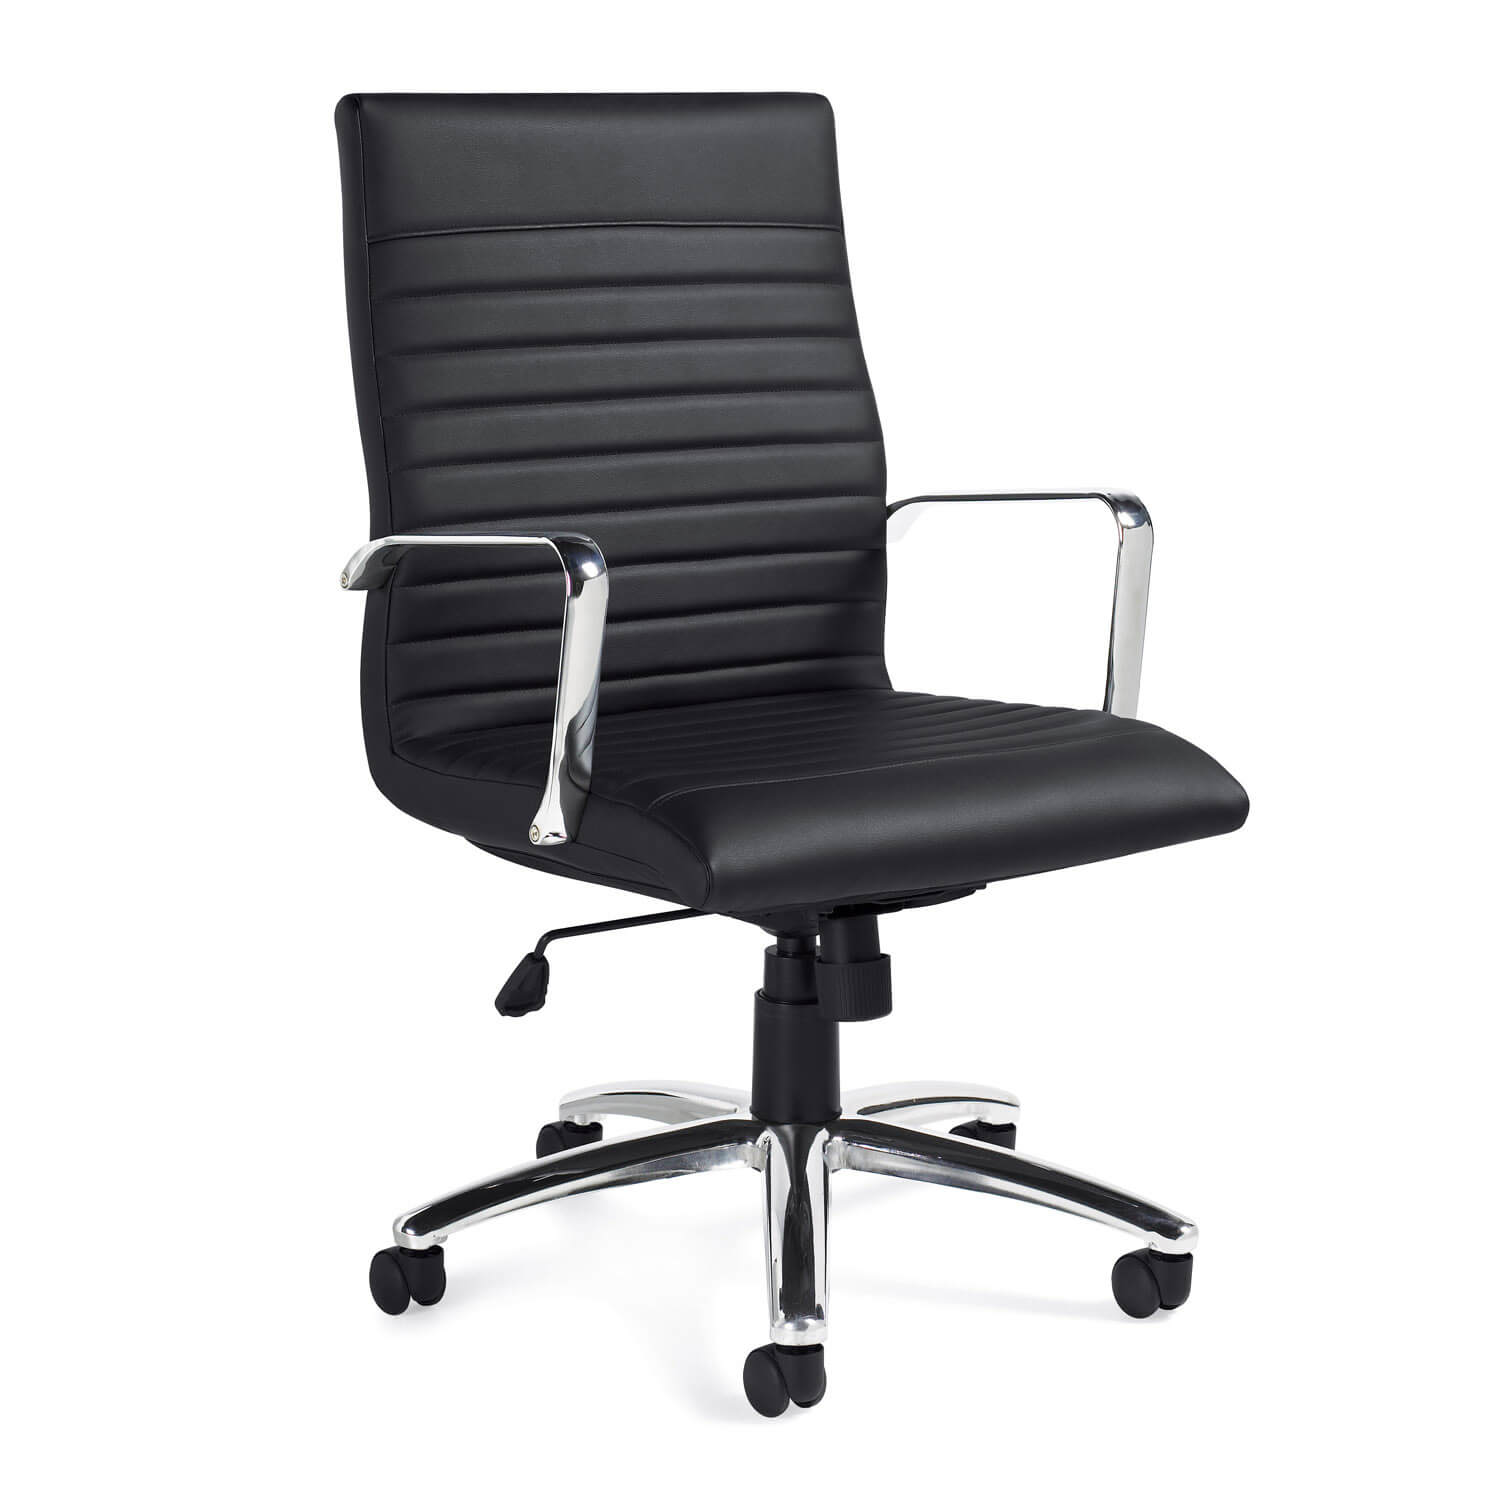 chairs-for-office-executive-chair.jpg